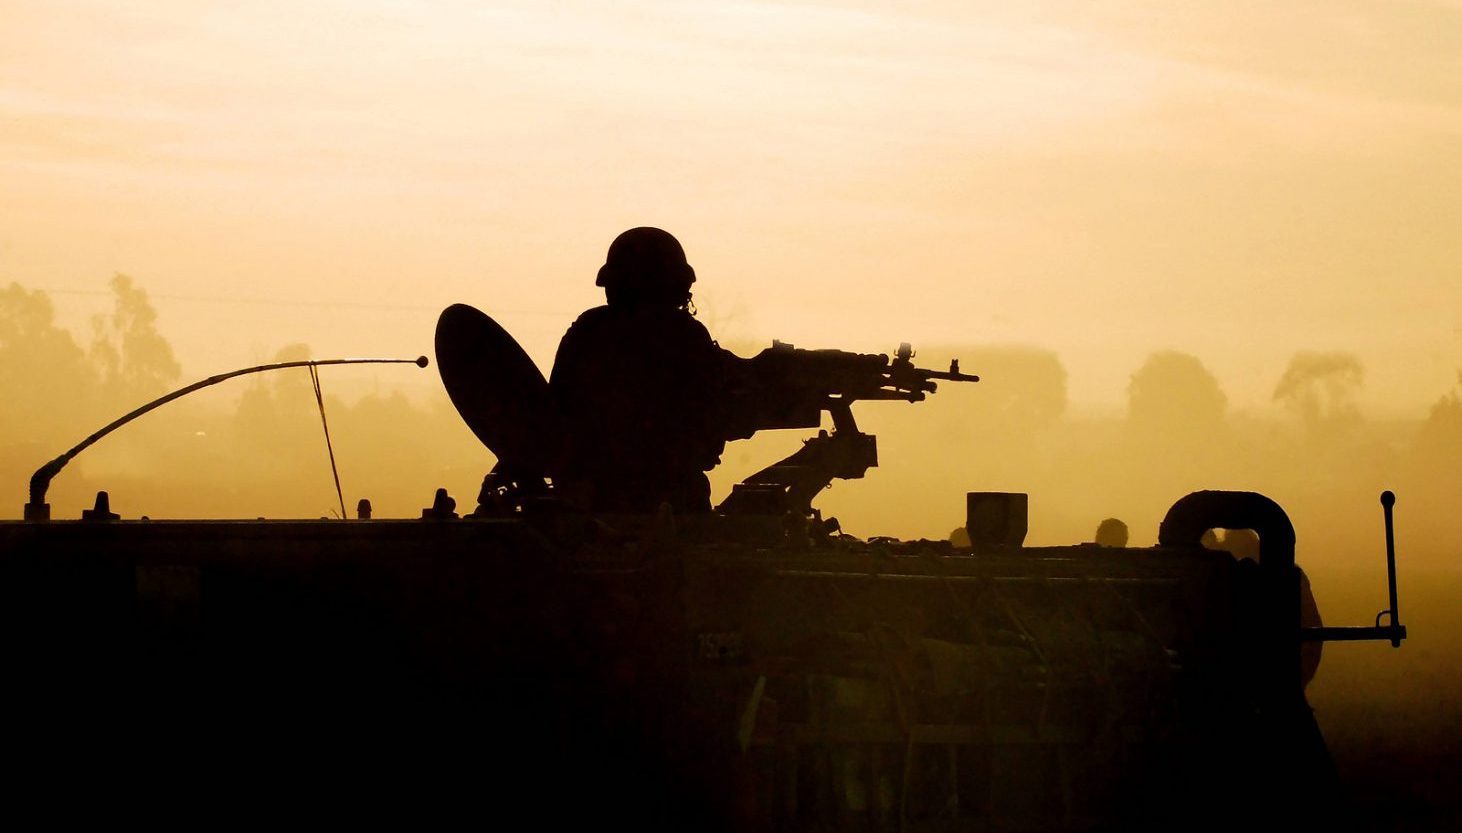 Silhouette of an army soldier preparing his tank and weapons at sunset